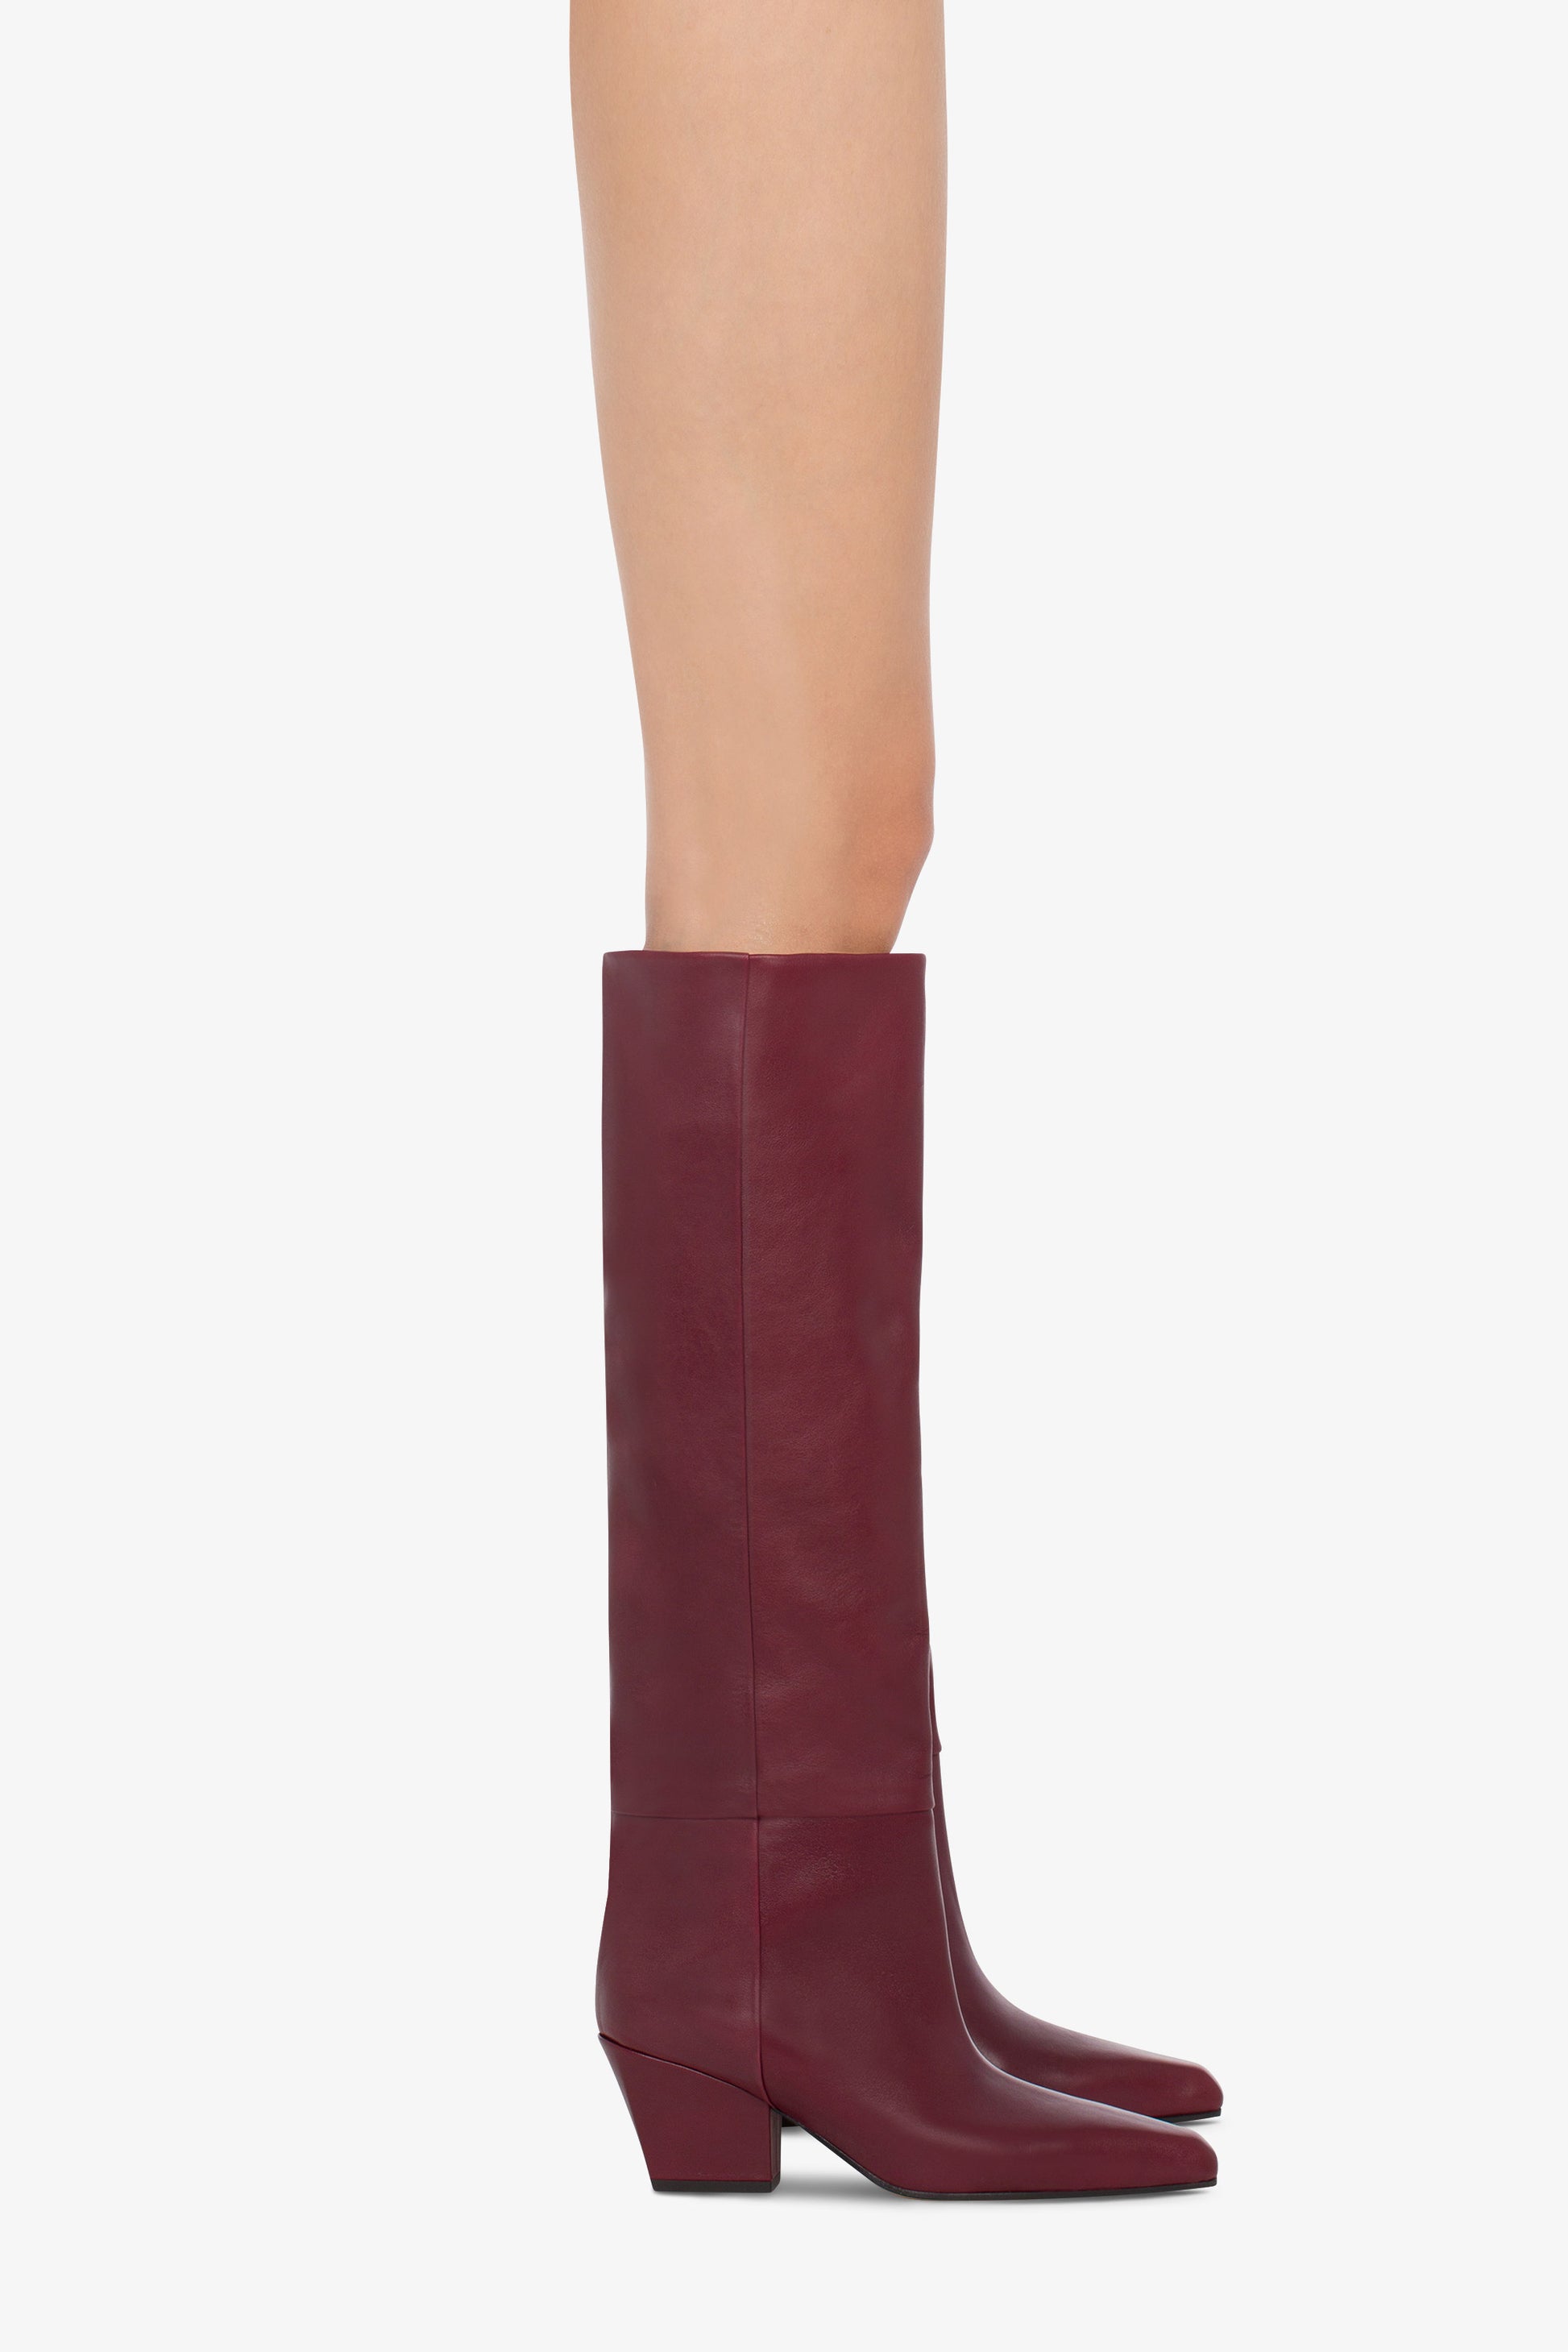 Knee-high, long pointed boot in supple rouge noir leather - Producto usado